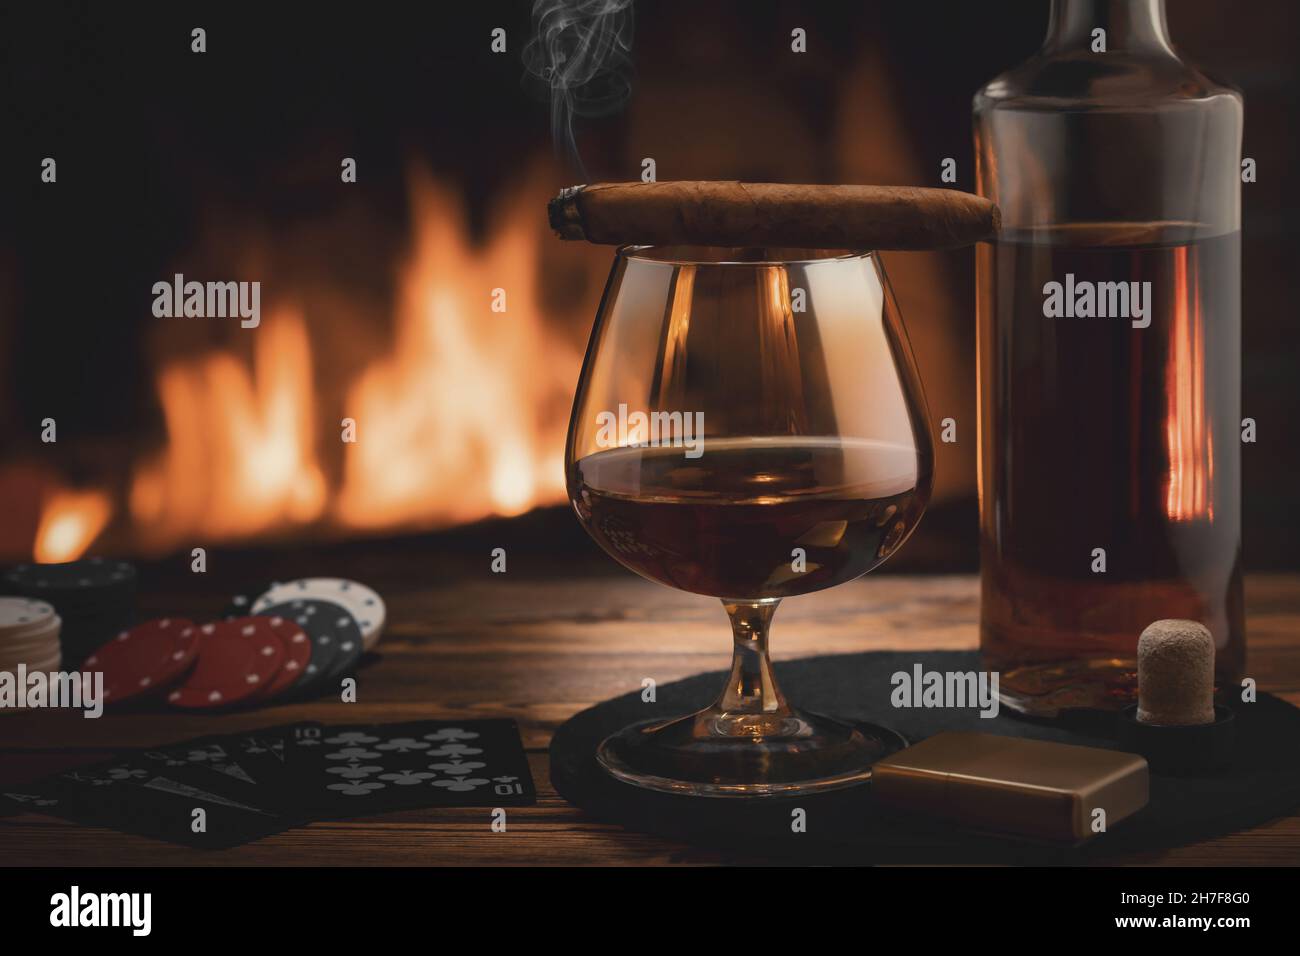 Glass of cognac, cigar, bottle, cards game and chips on the table near the burning fireplace. Rest, pleasure, good luck and dolce vita concept. Stock Photo